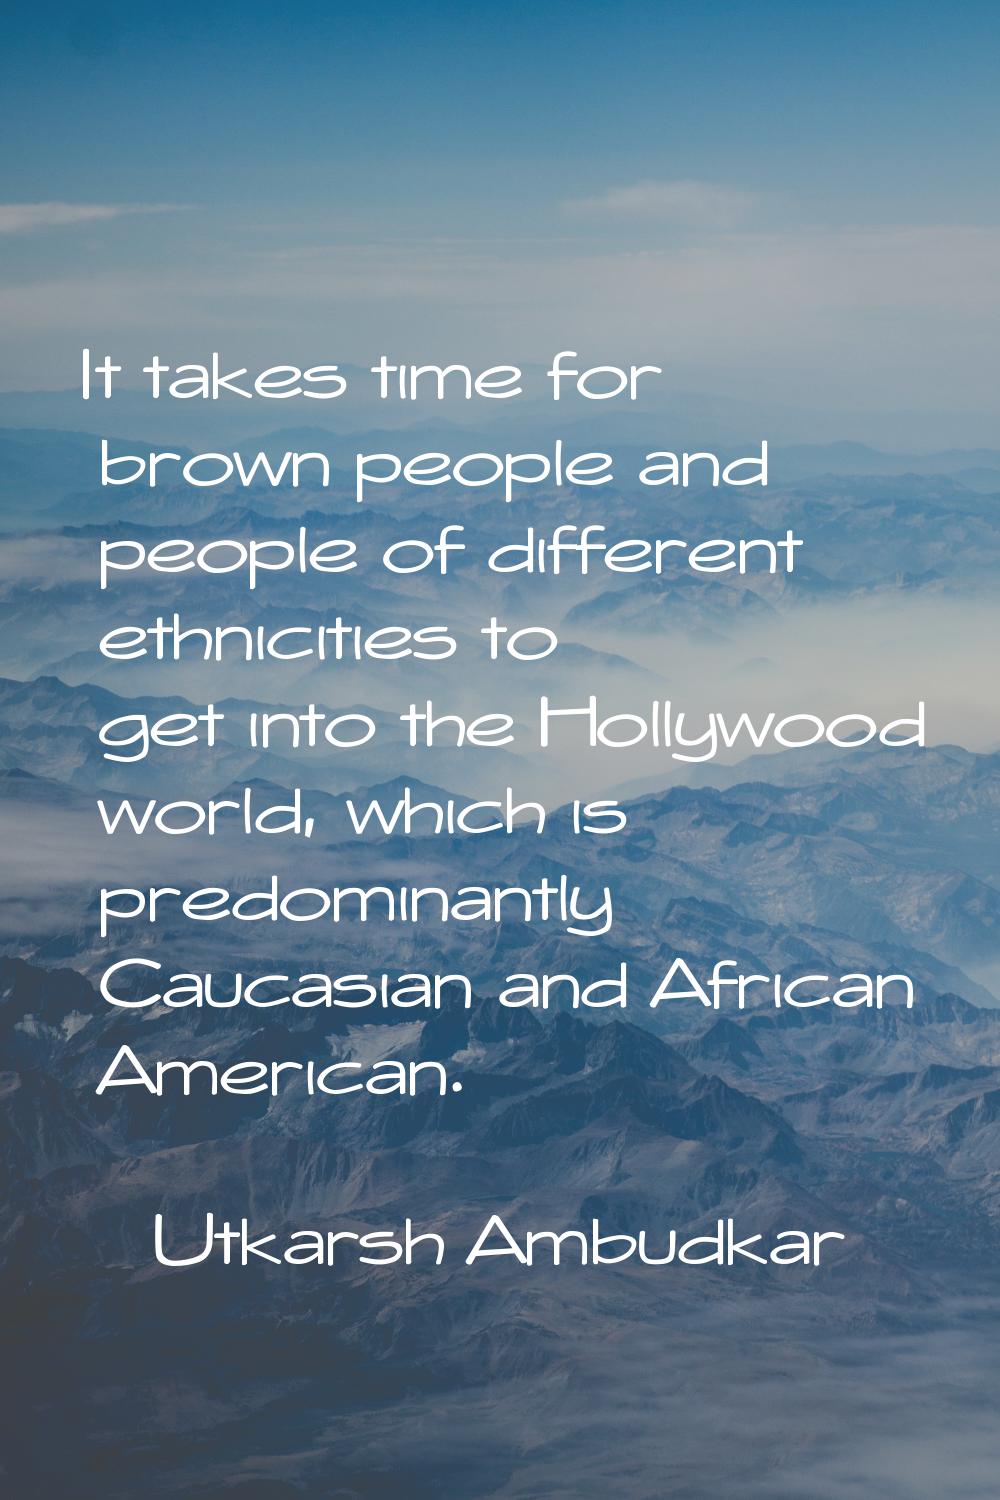 It takes time for brown people and people of different ethnicities to get into the Hollywood world,